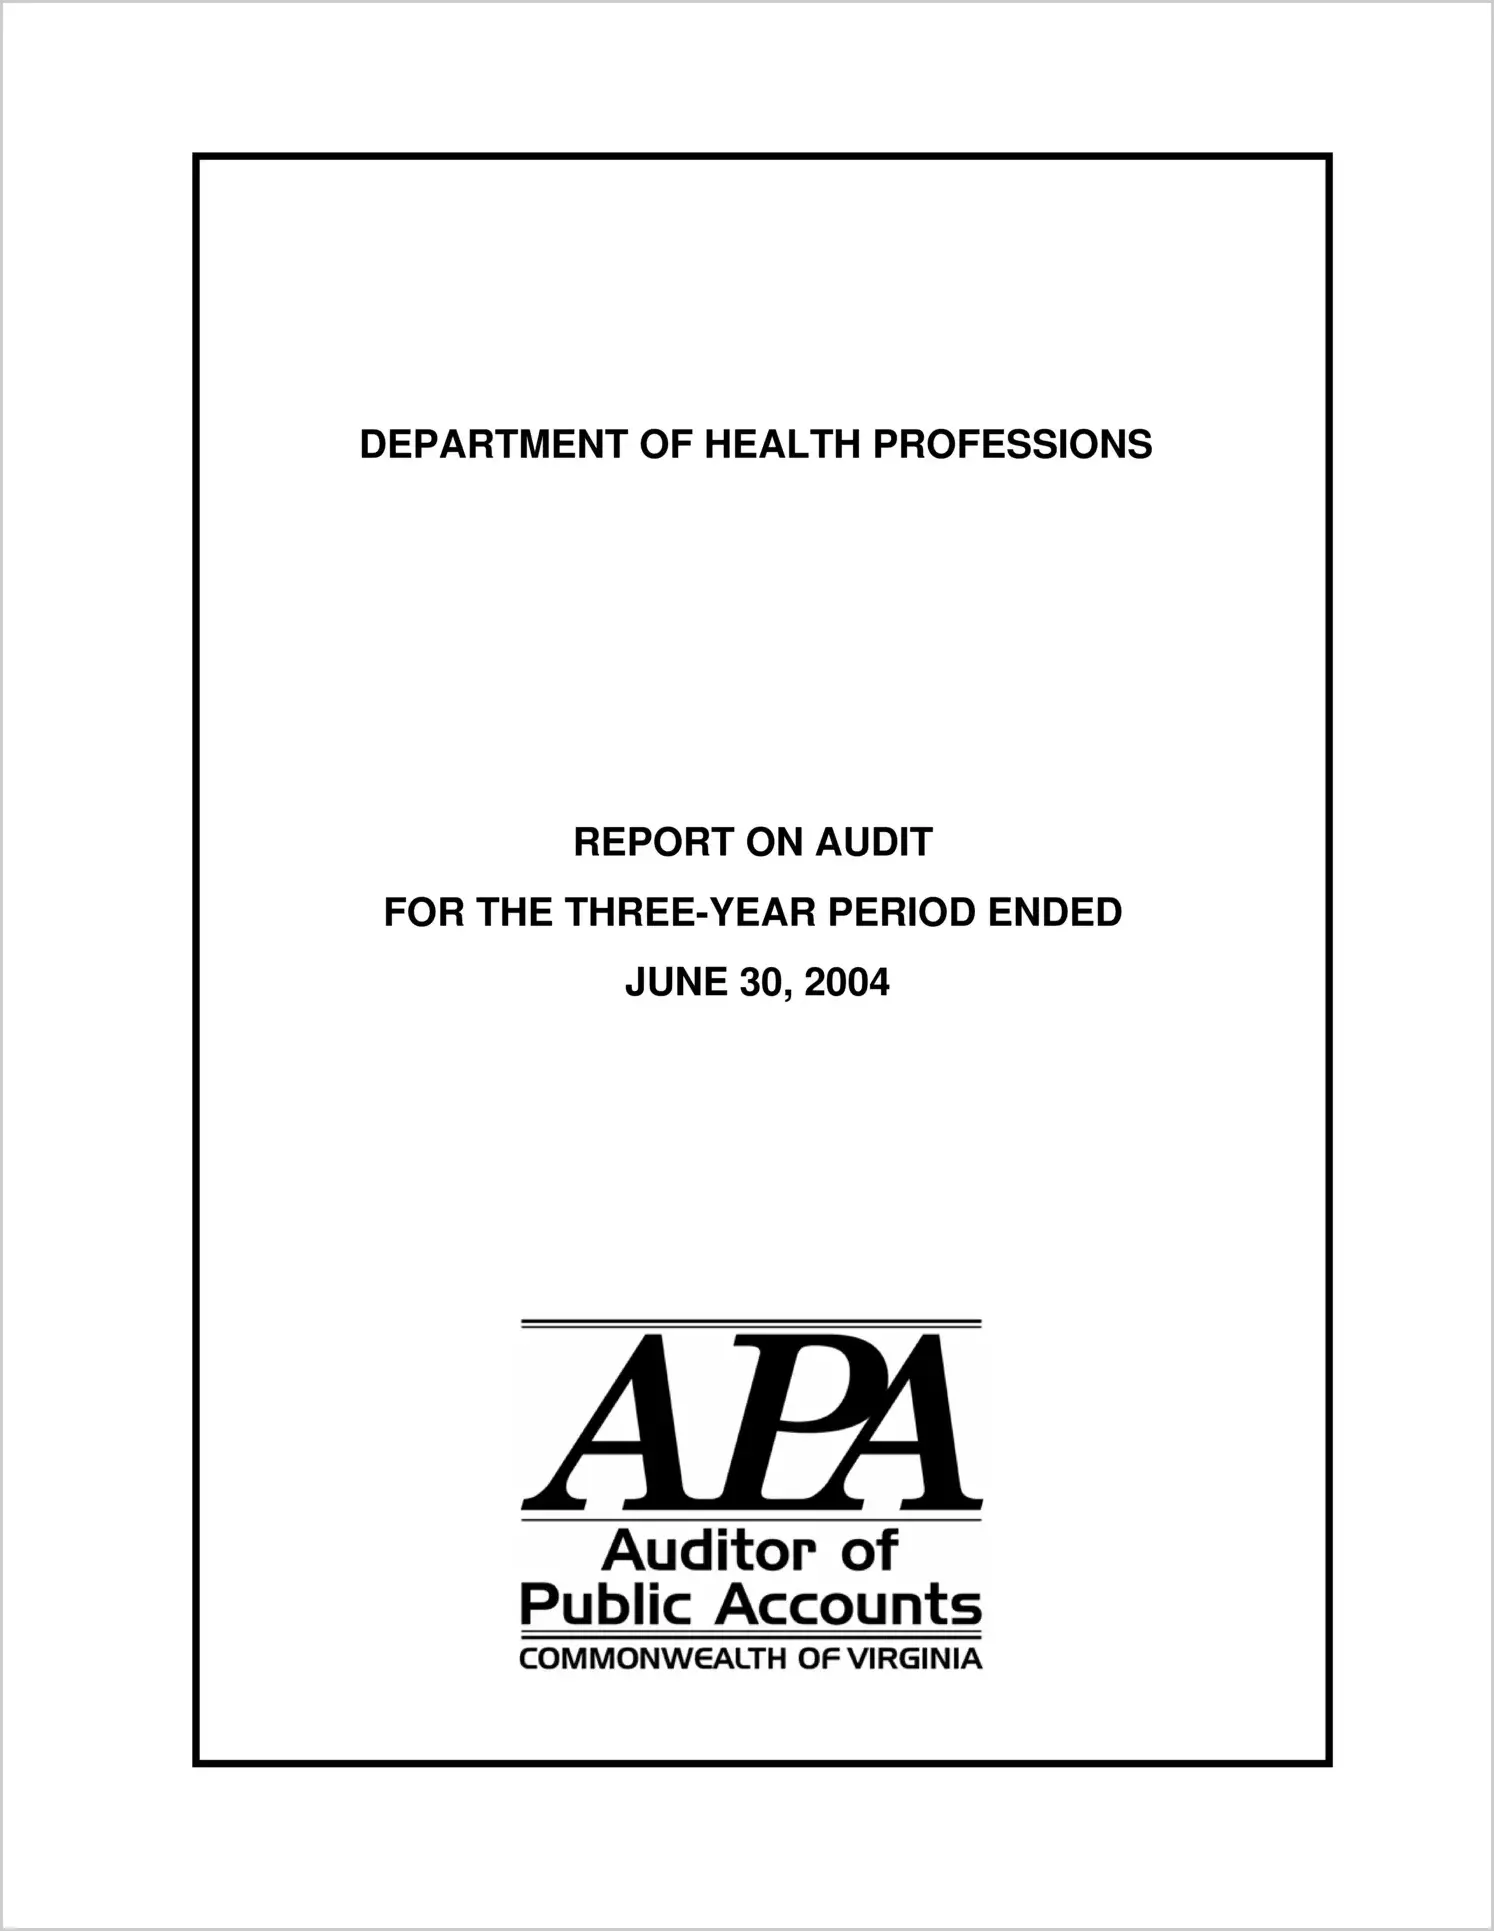 Department of Health Professions for the three-year period ended June 30, 2004